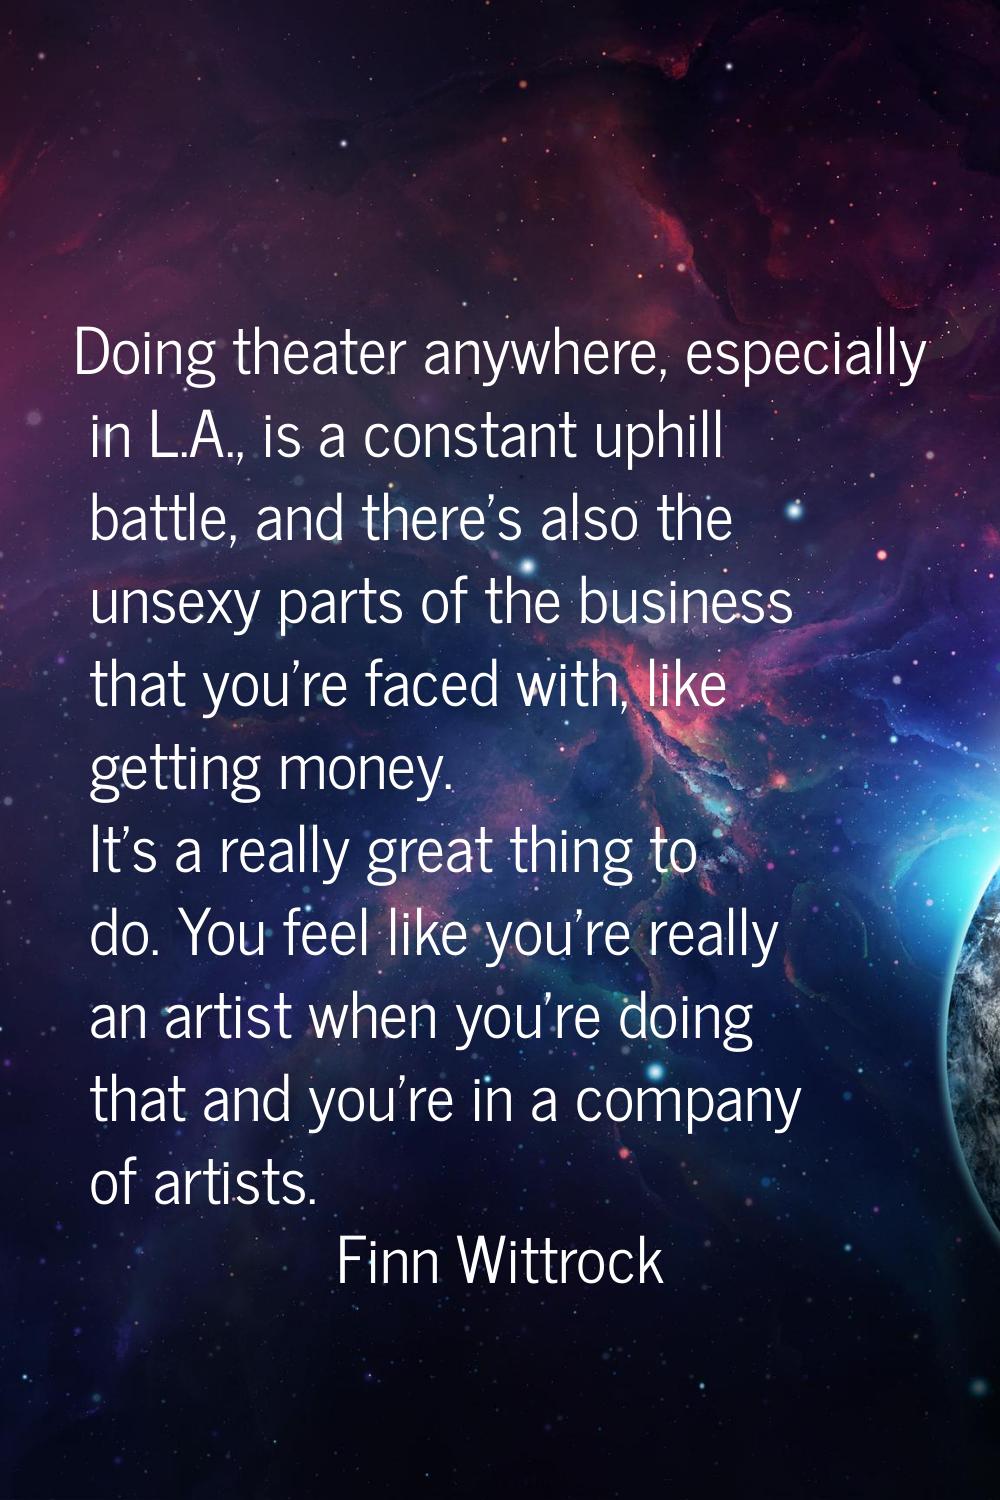 Doing theater anywhere, especially in L.A., is a constant uphill battle, and there's also the unsex